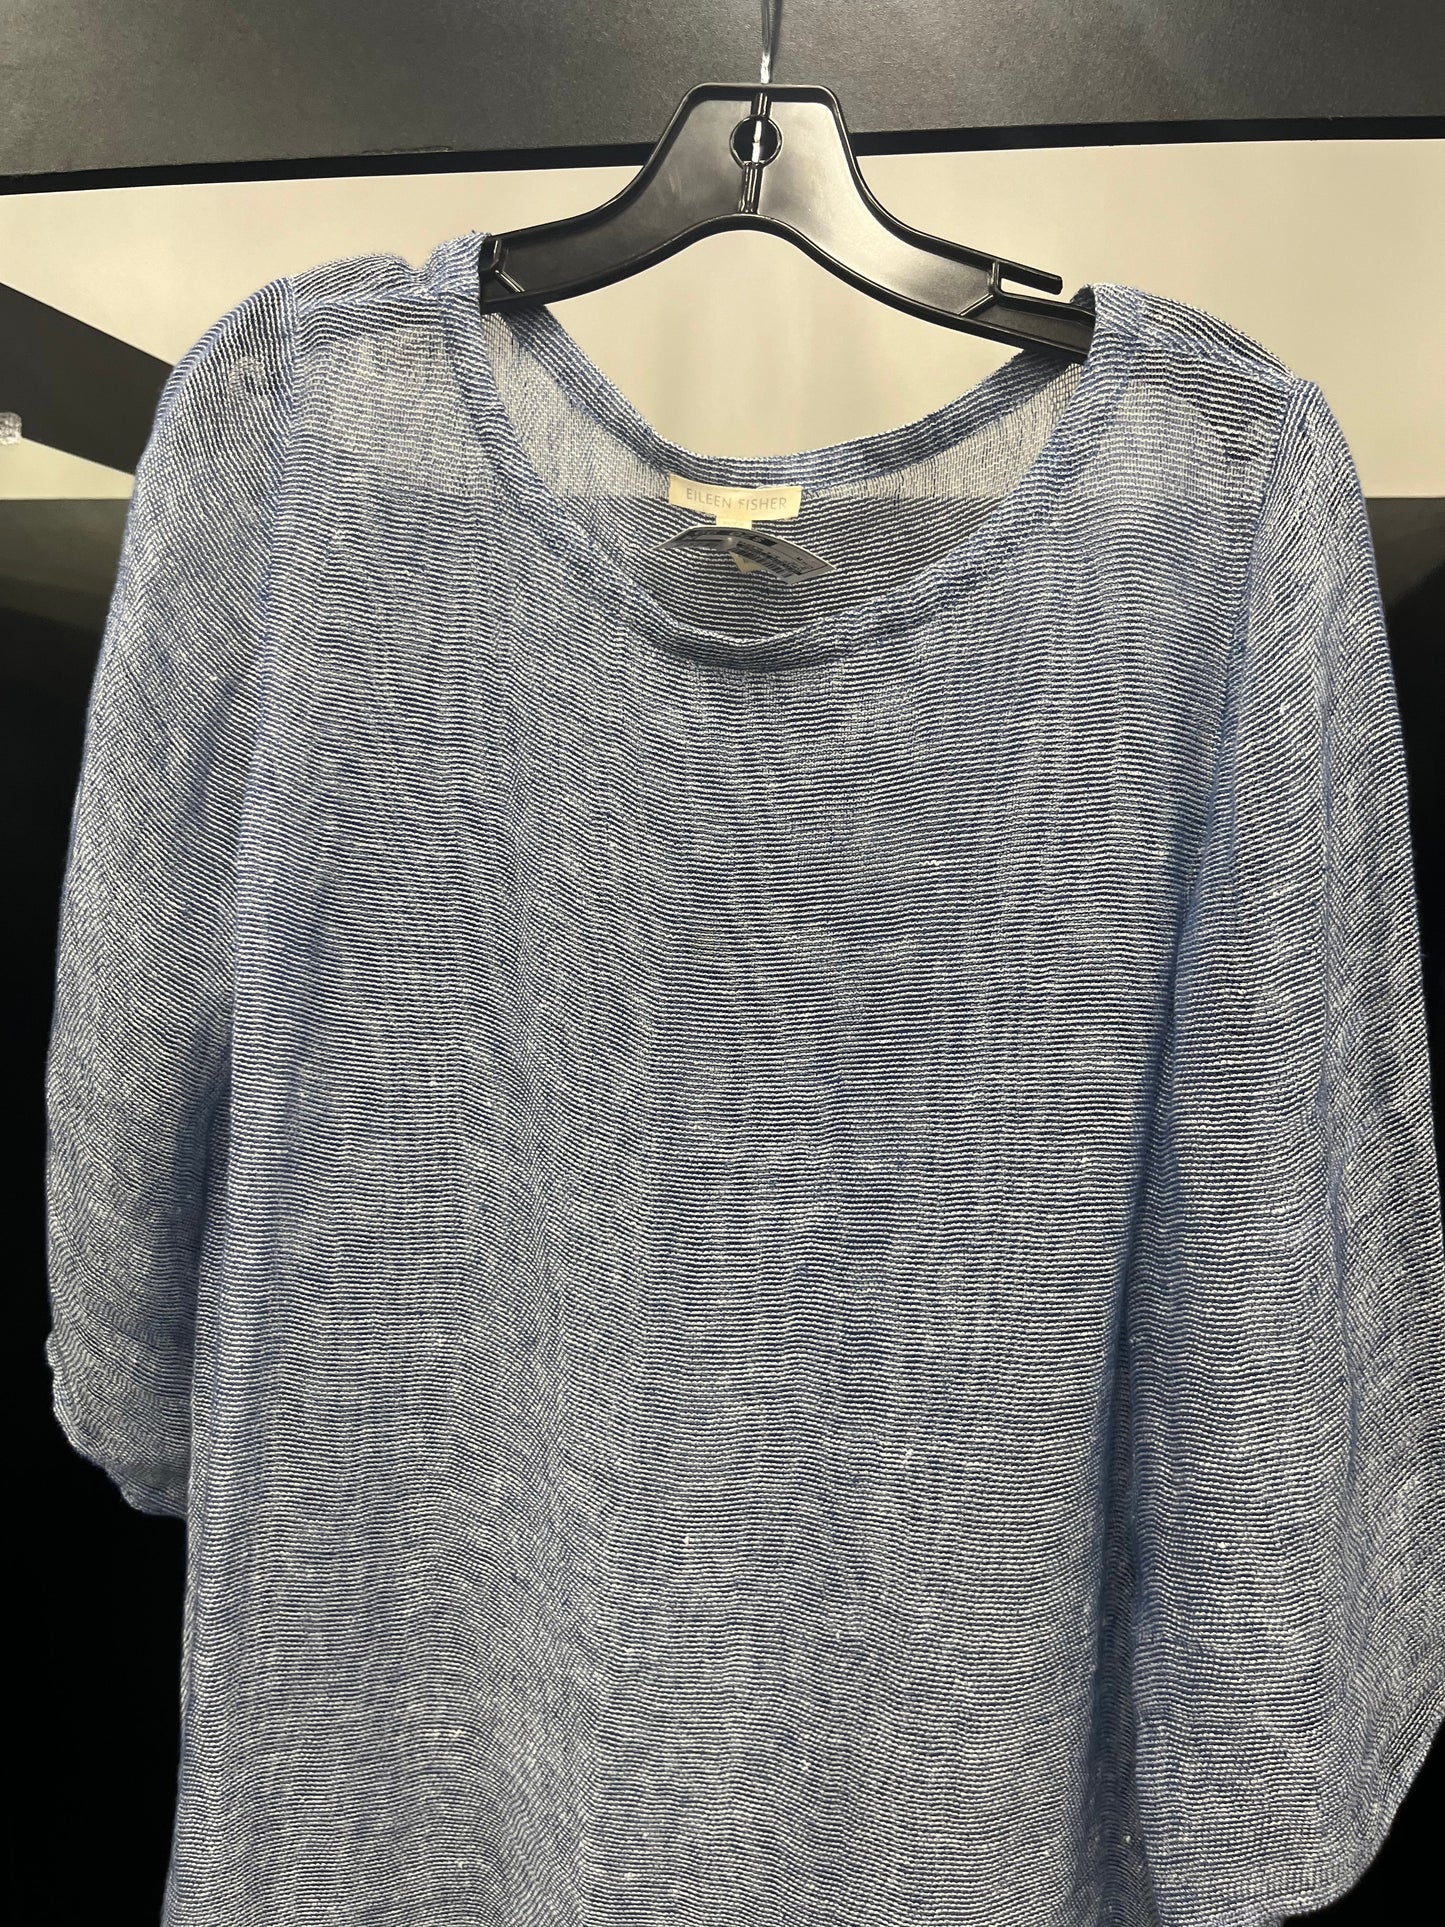 Blue Tunic 3/4 Sleeve Eileen Fisher, Size M